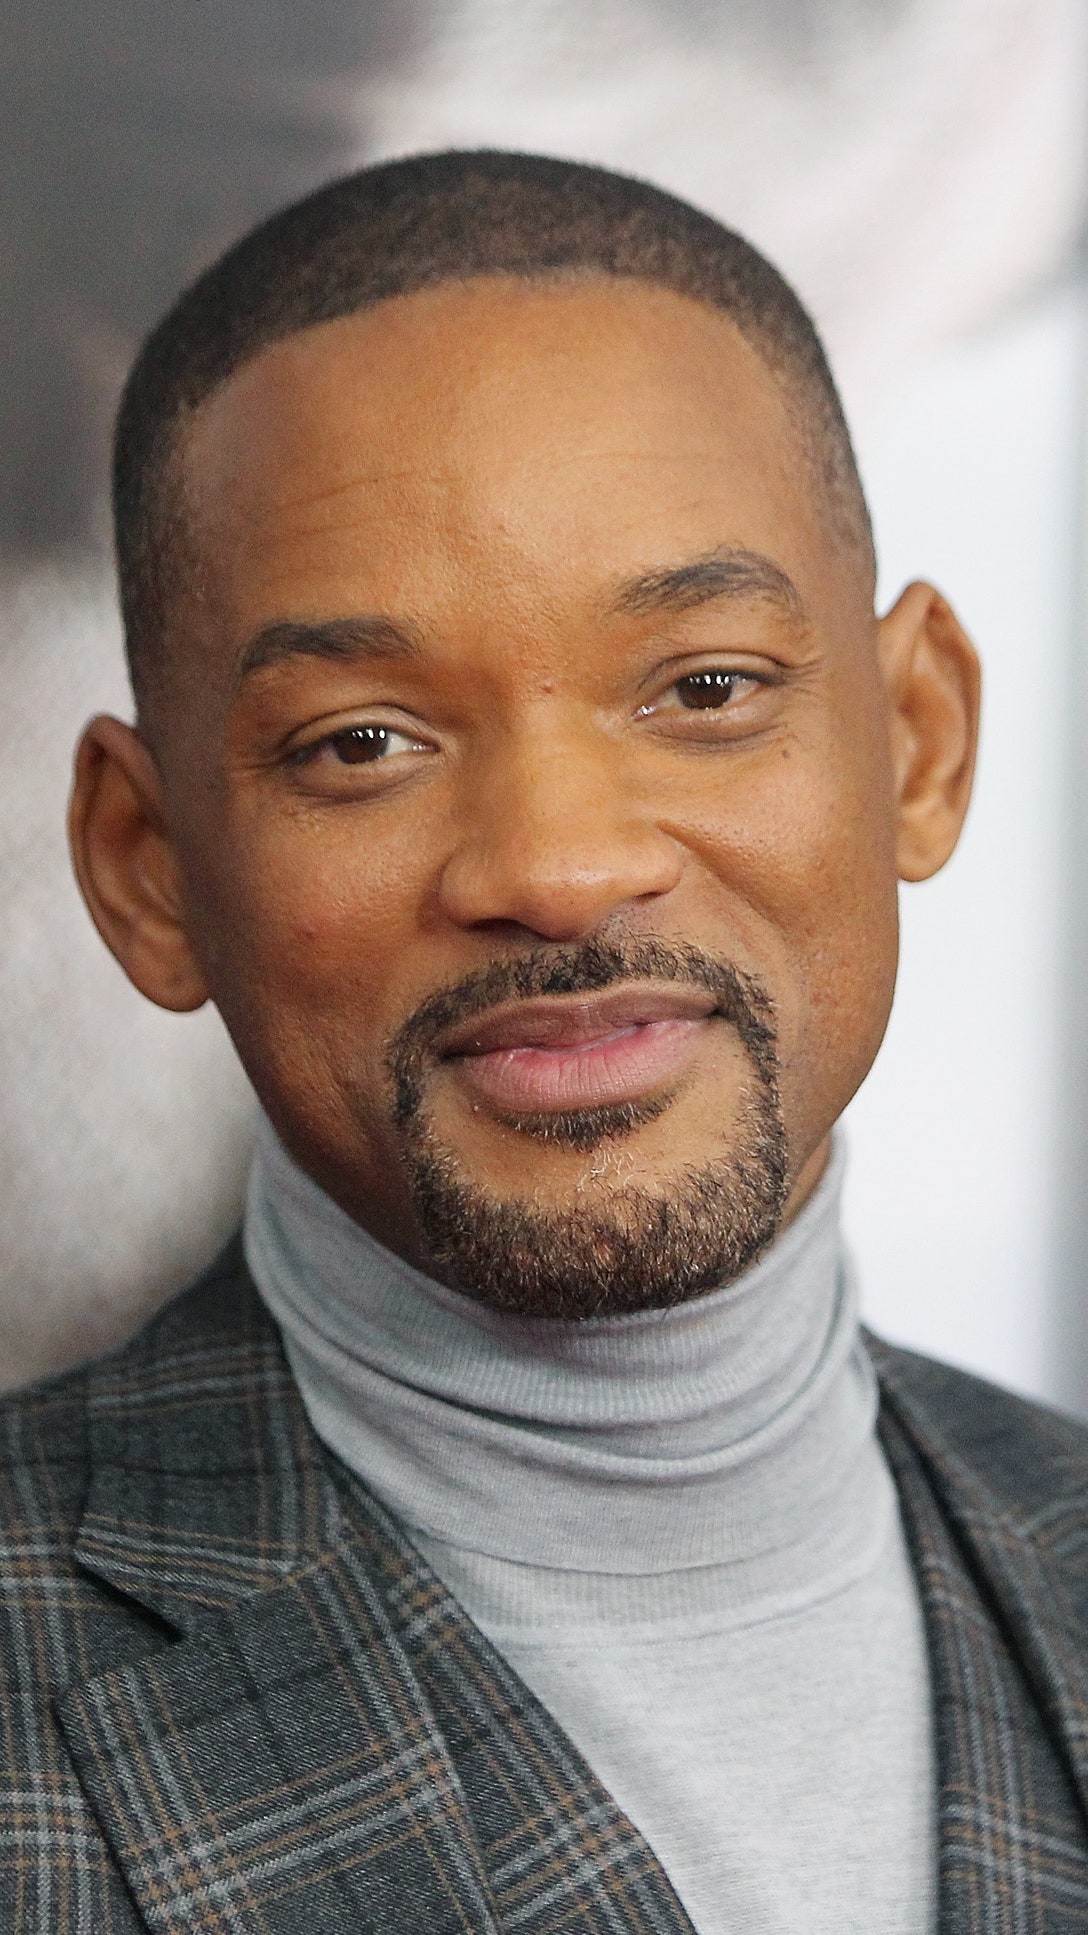 will Smith Says He Fell In Love” With Stockard Channing During His First Marriage Vanity Fair